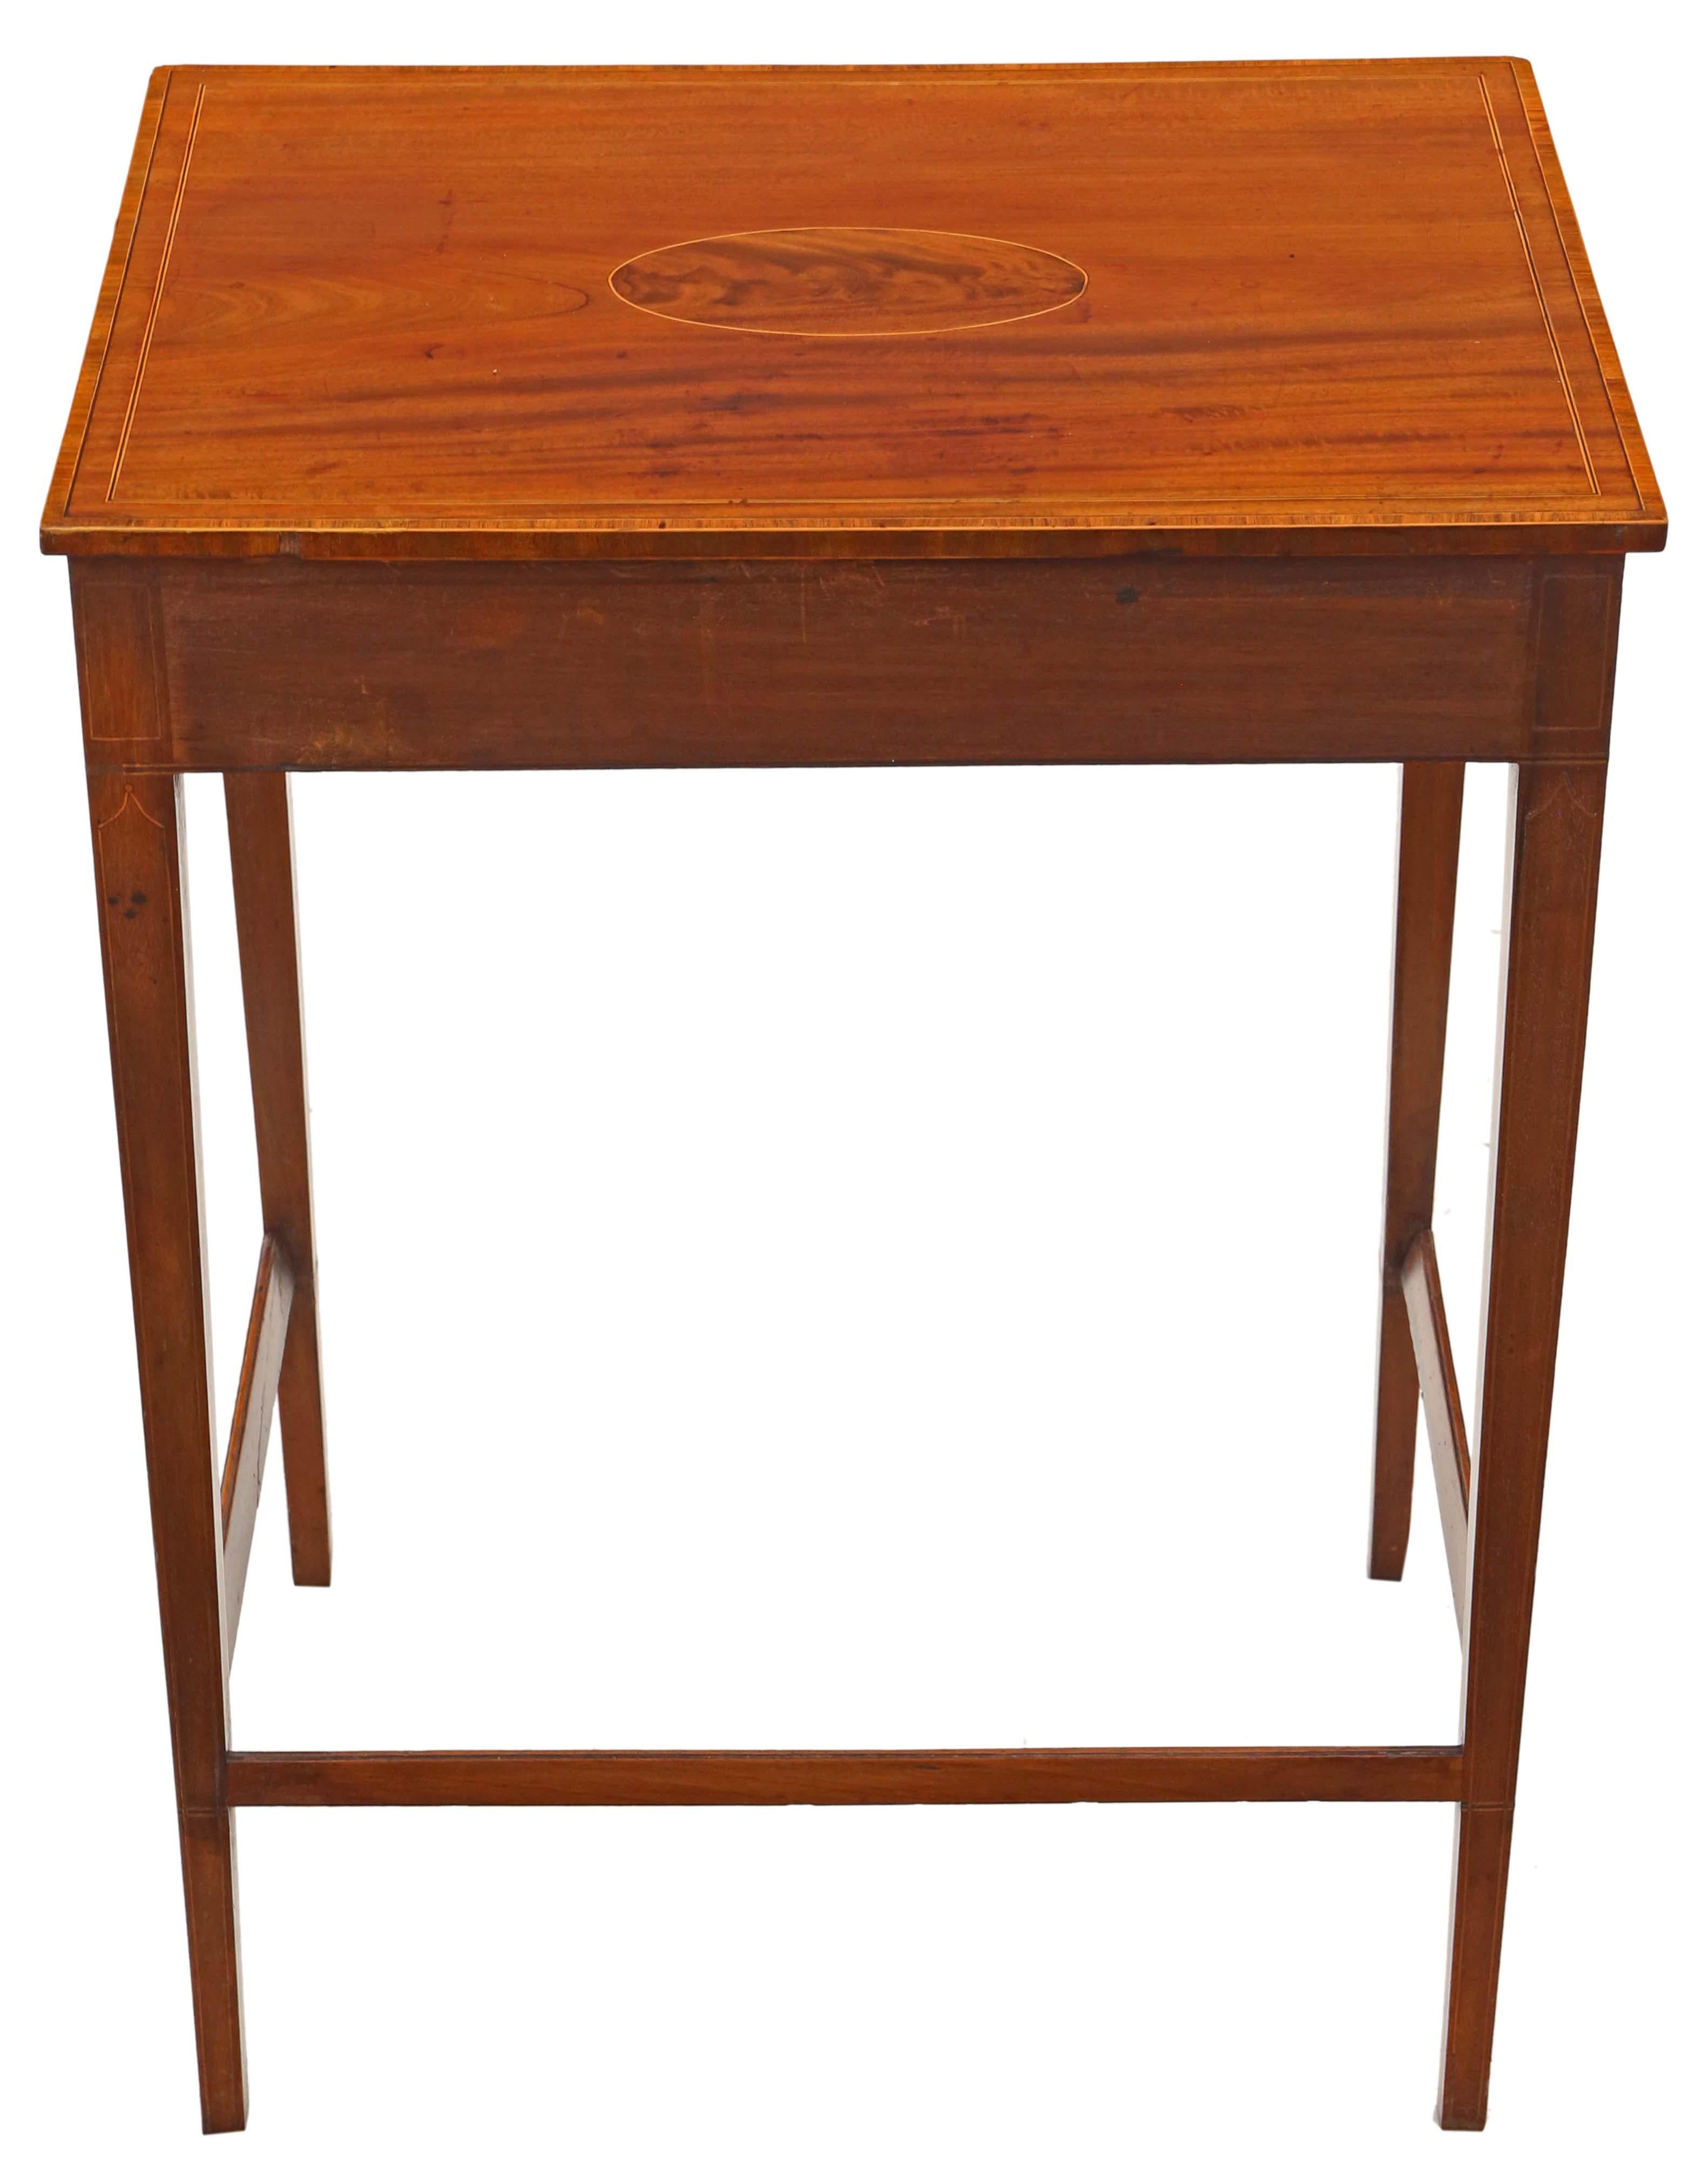 Antique Fine Quality Early 19th Century Inlaid Mahogany Writing Side Table Desk For Sale 1